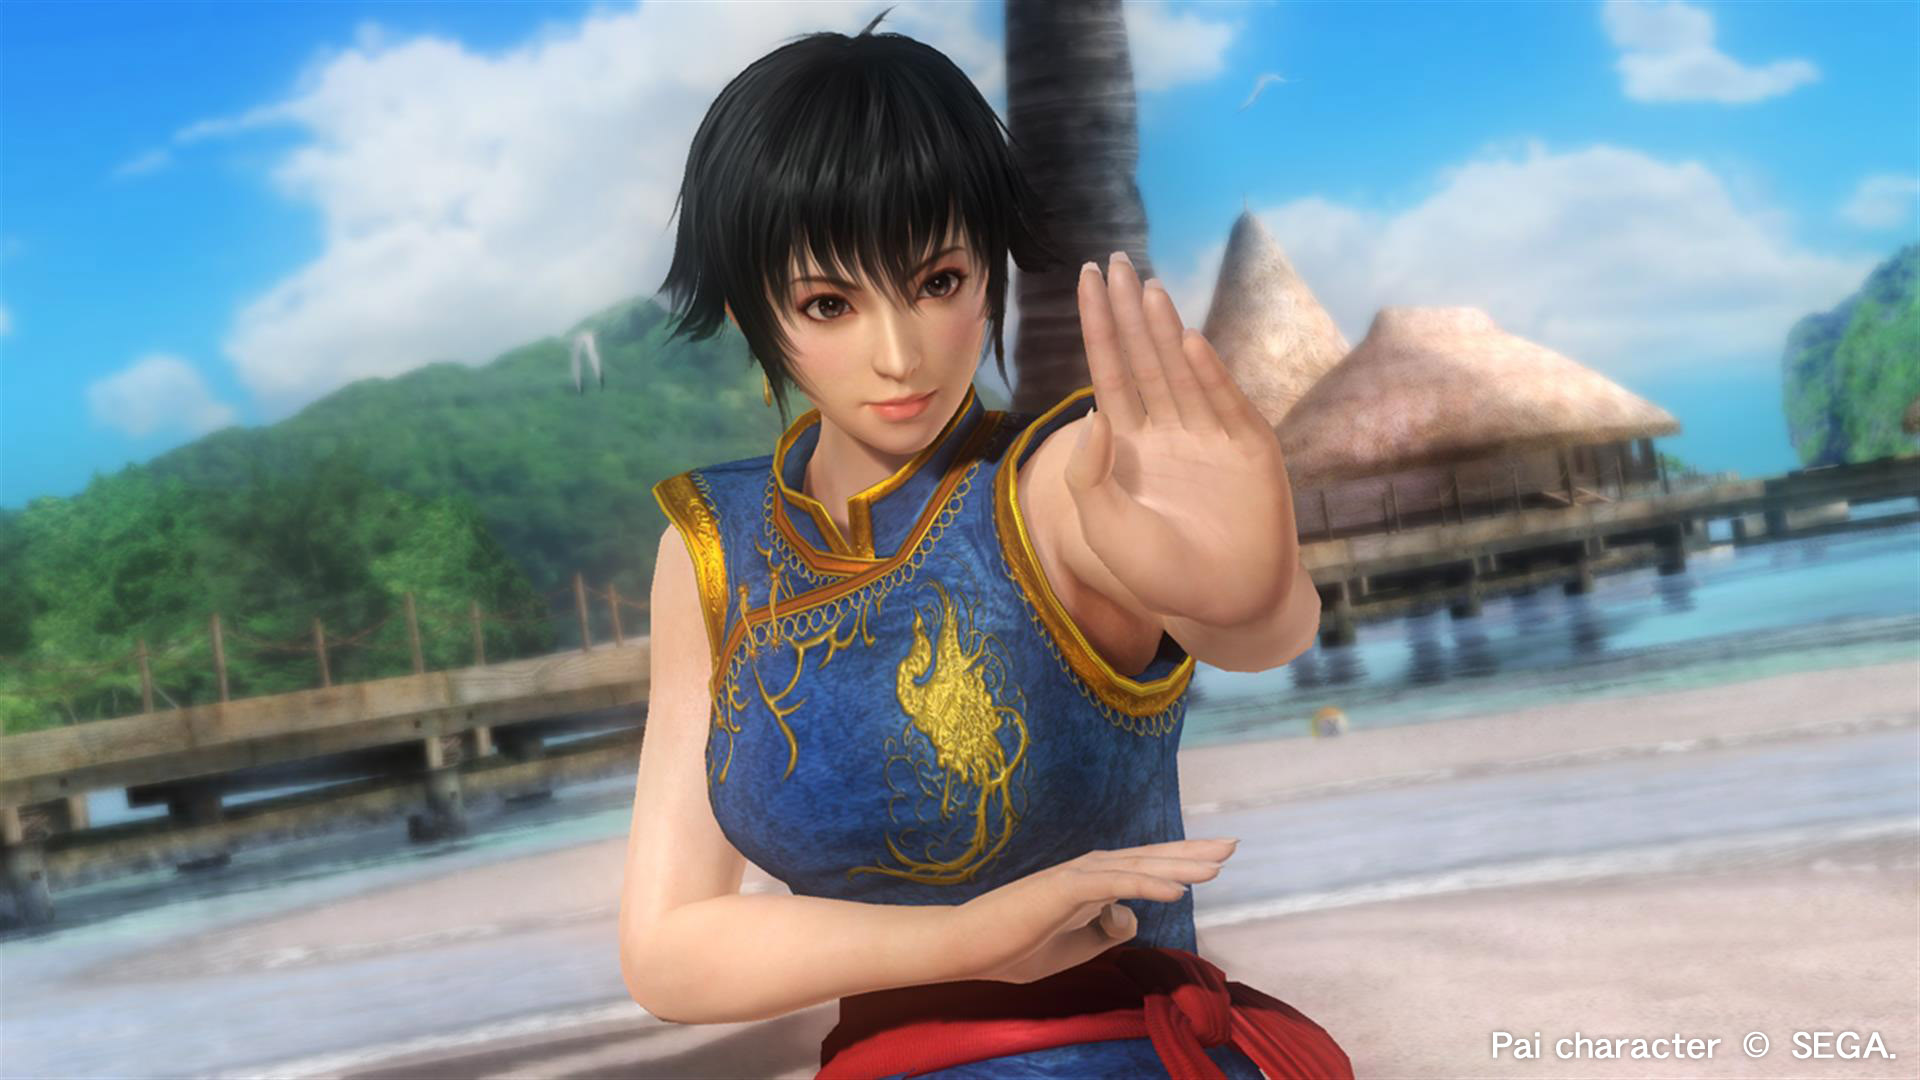 download dead or alive 5 last round core fighters